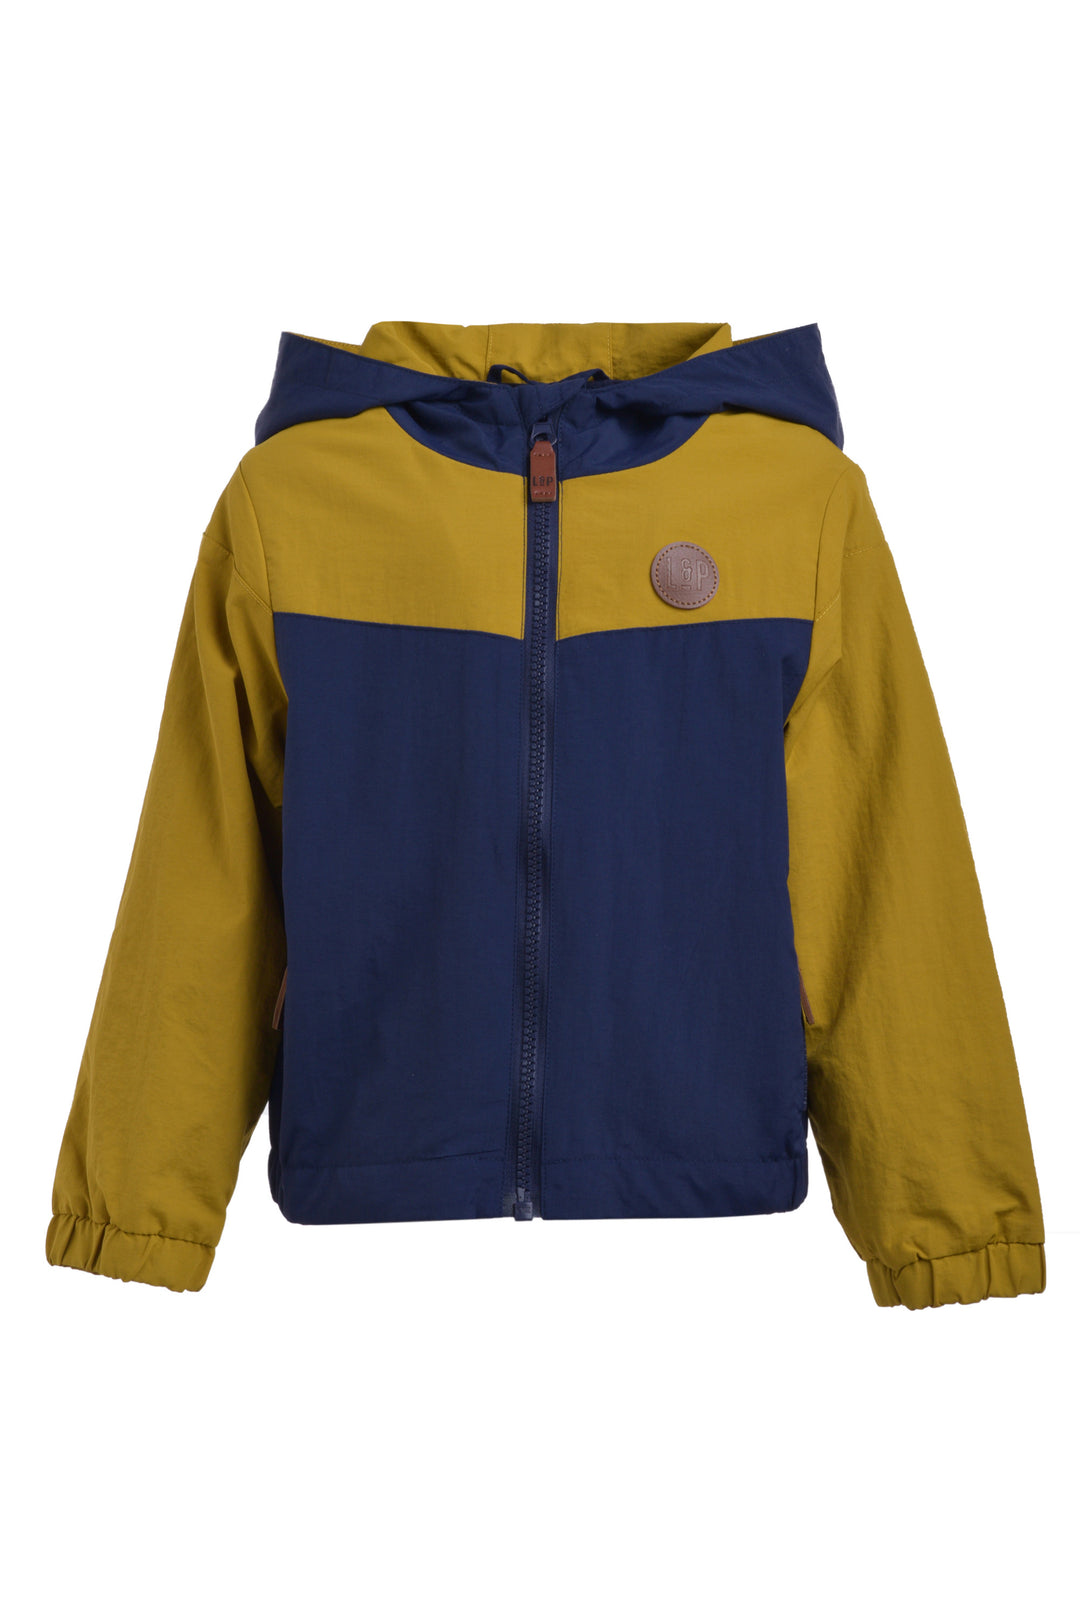 Cotton Lined Outdoor Coat [Baby]